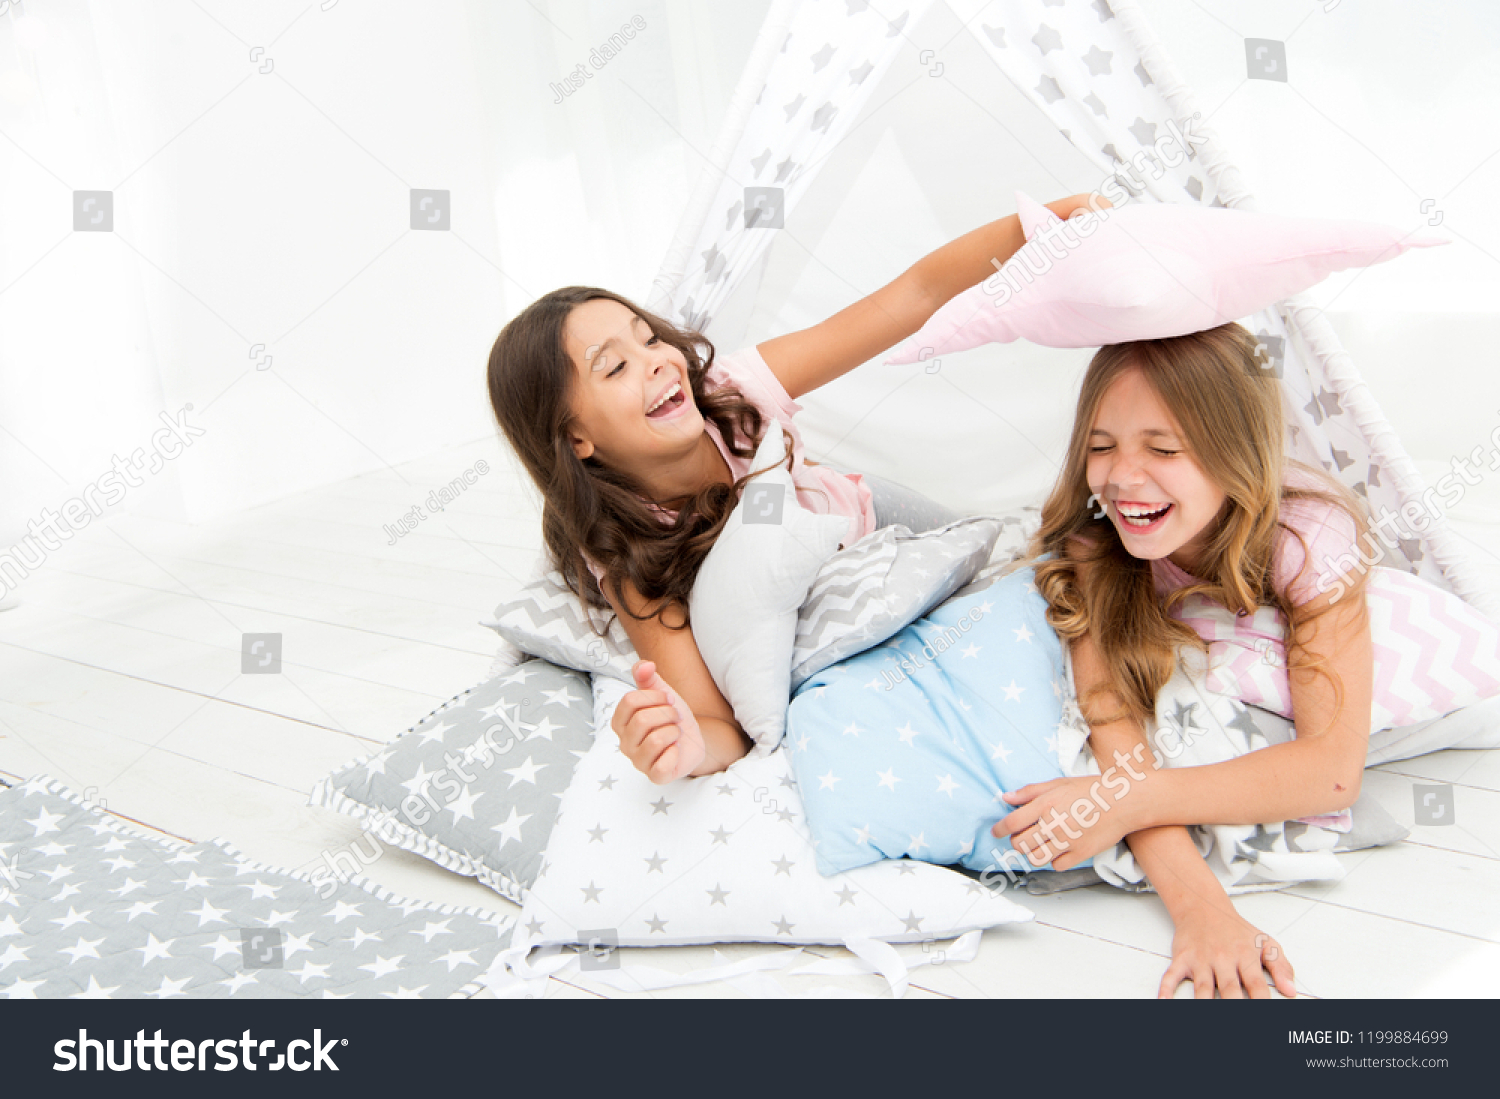 Pajamas party for kids. Girls having fun tipi house. Girlish leisure. Sisters share gossips having fun at home. Cozy place tipi house. Sisters or best friends spend time together lay in tipi house. #1199884699